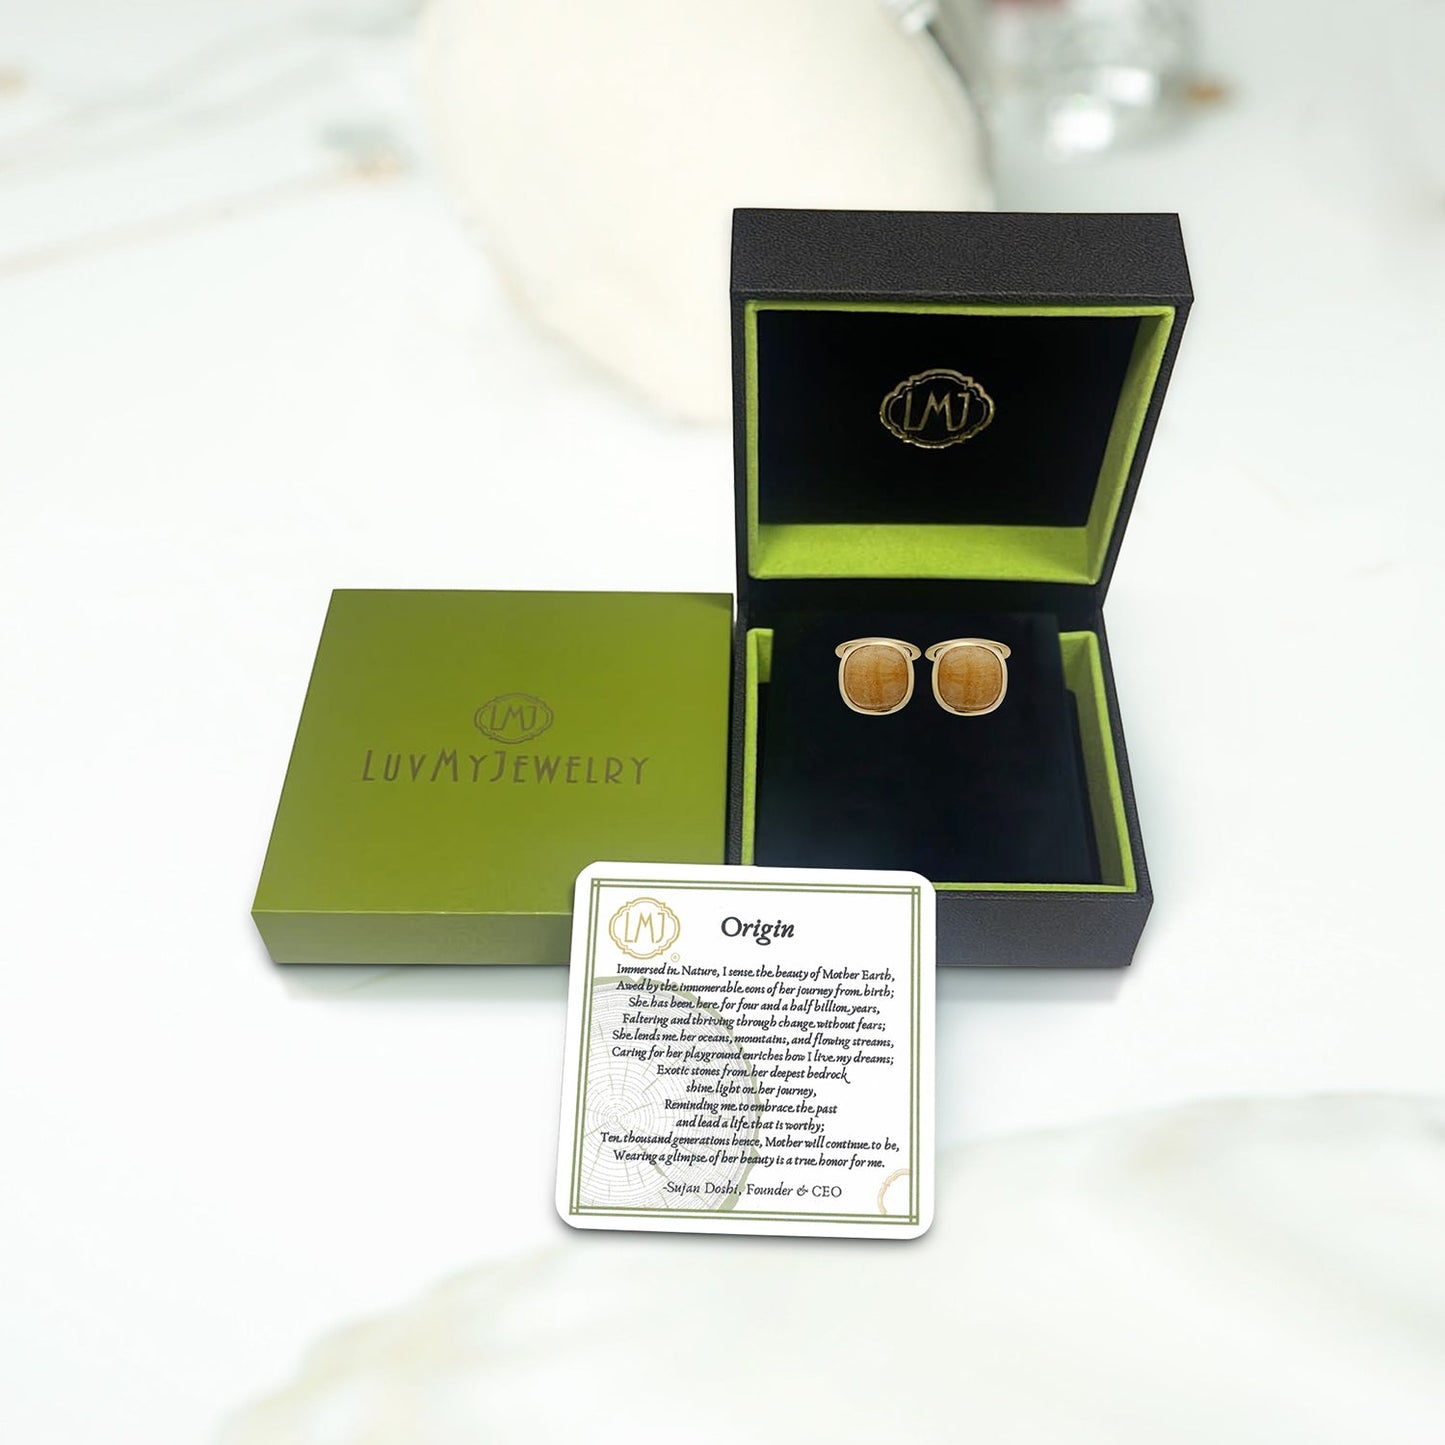 Yellow Lace Agate Stone Cufflinks in 14K Yellow Gold Plated Sterling Silver by LuvMyJewelry